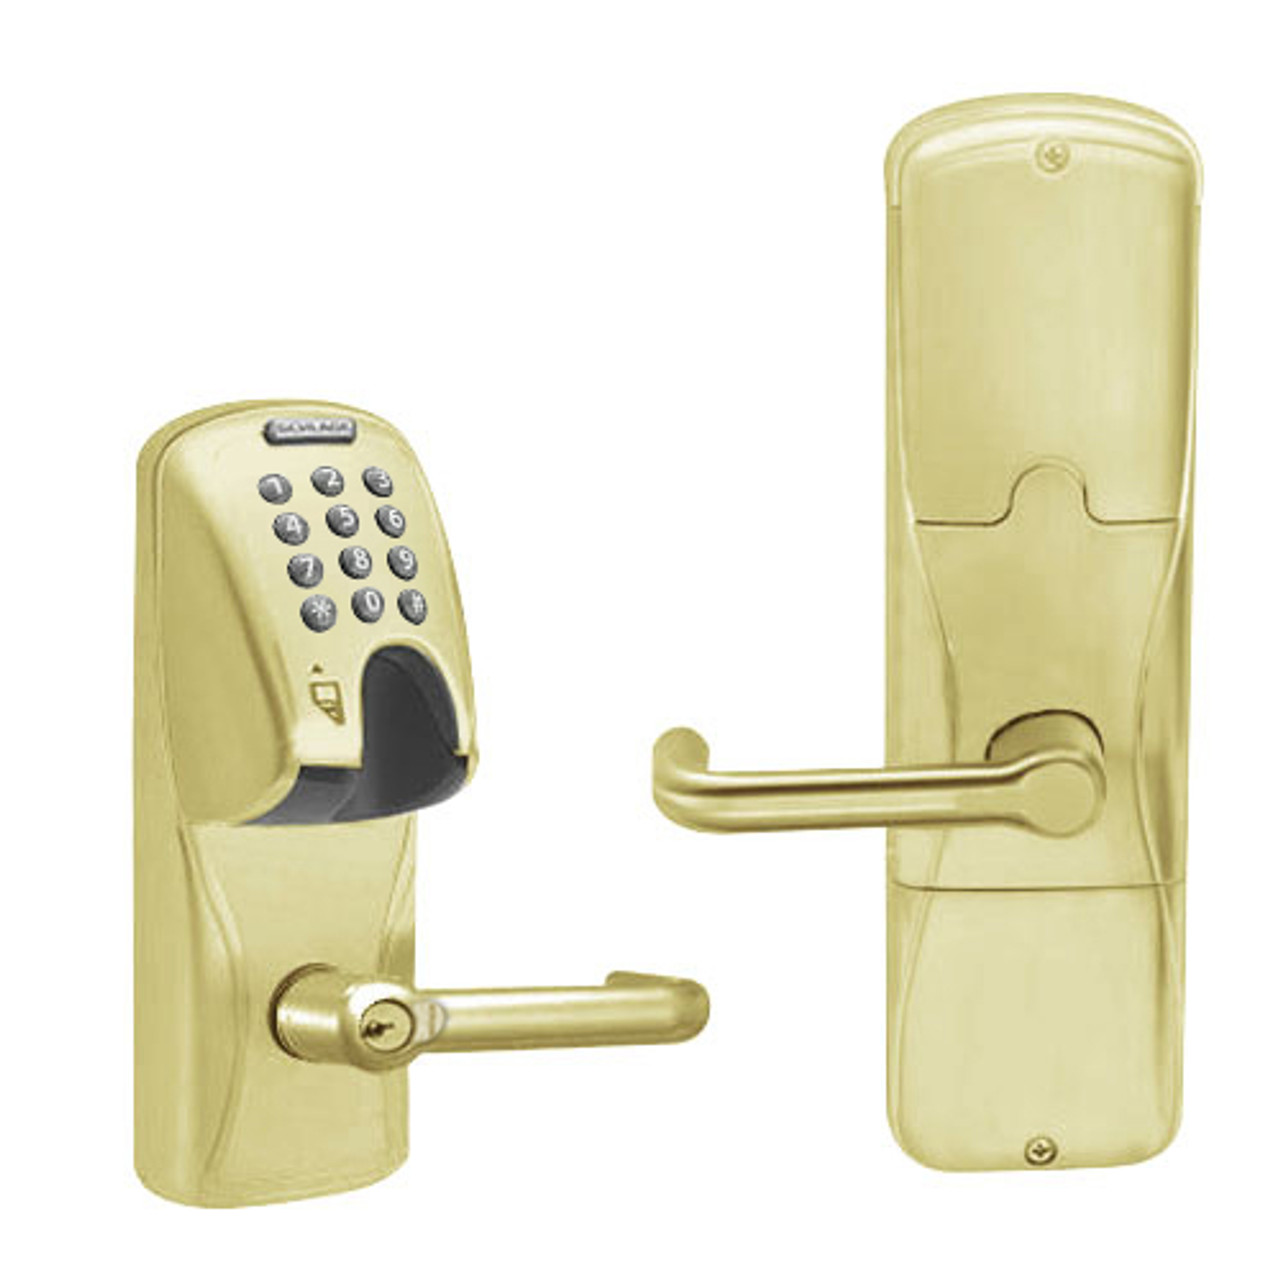 AD200-MD-60-MGK-TLR-GD-29R-606 Schlage Apartment Mortise Deadbolt Magnetic Stripe(Insert) Keypad Lock with Tubular Lever in Satin Brass